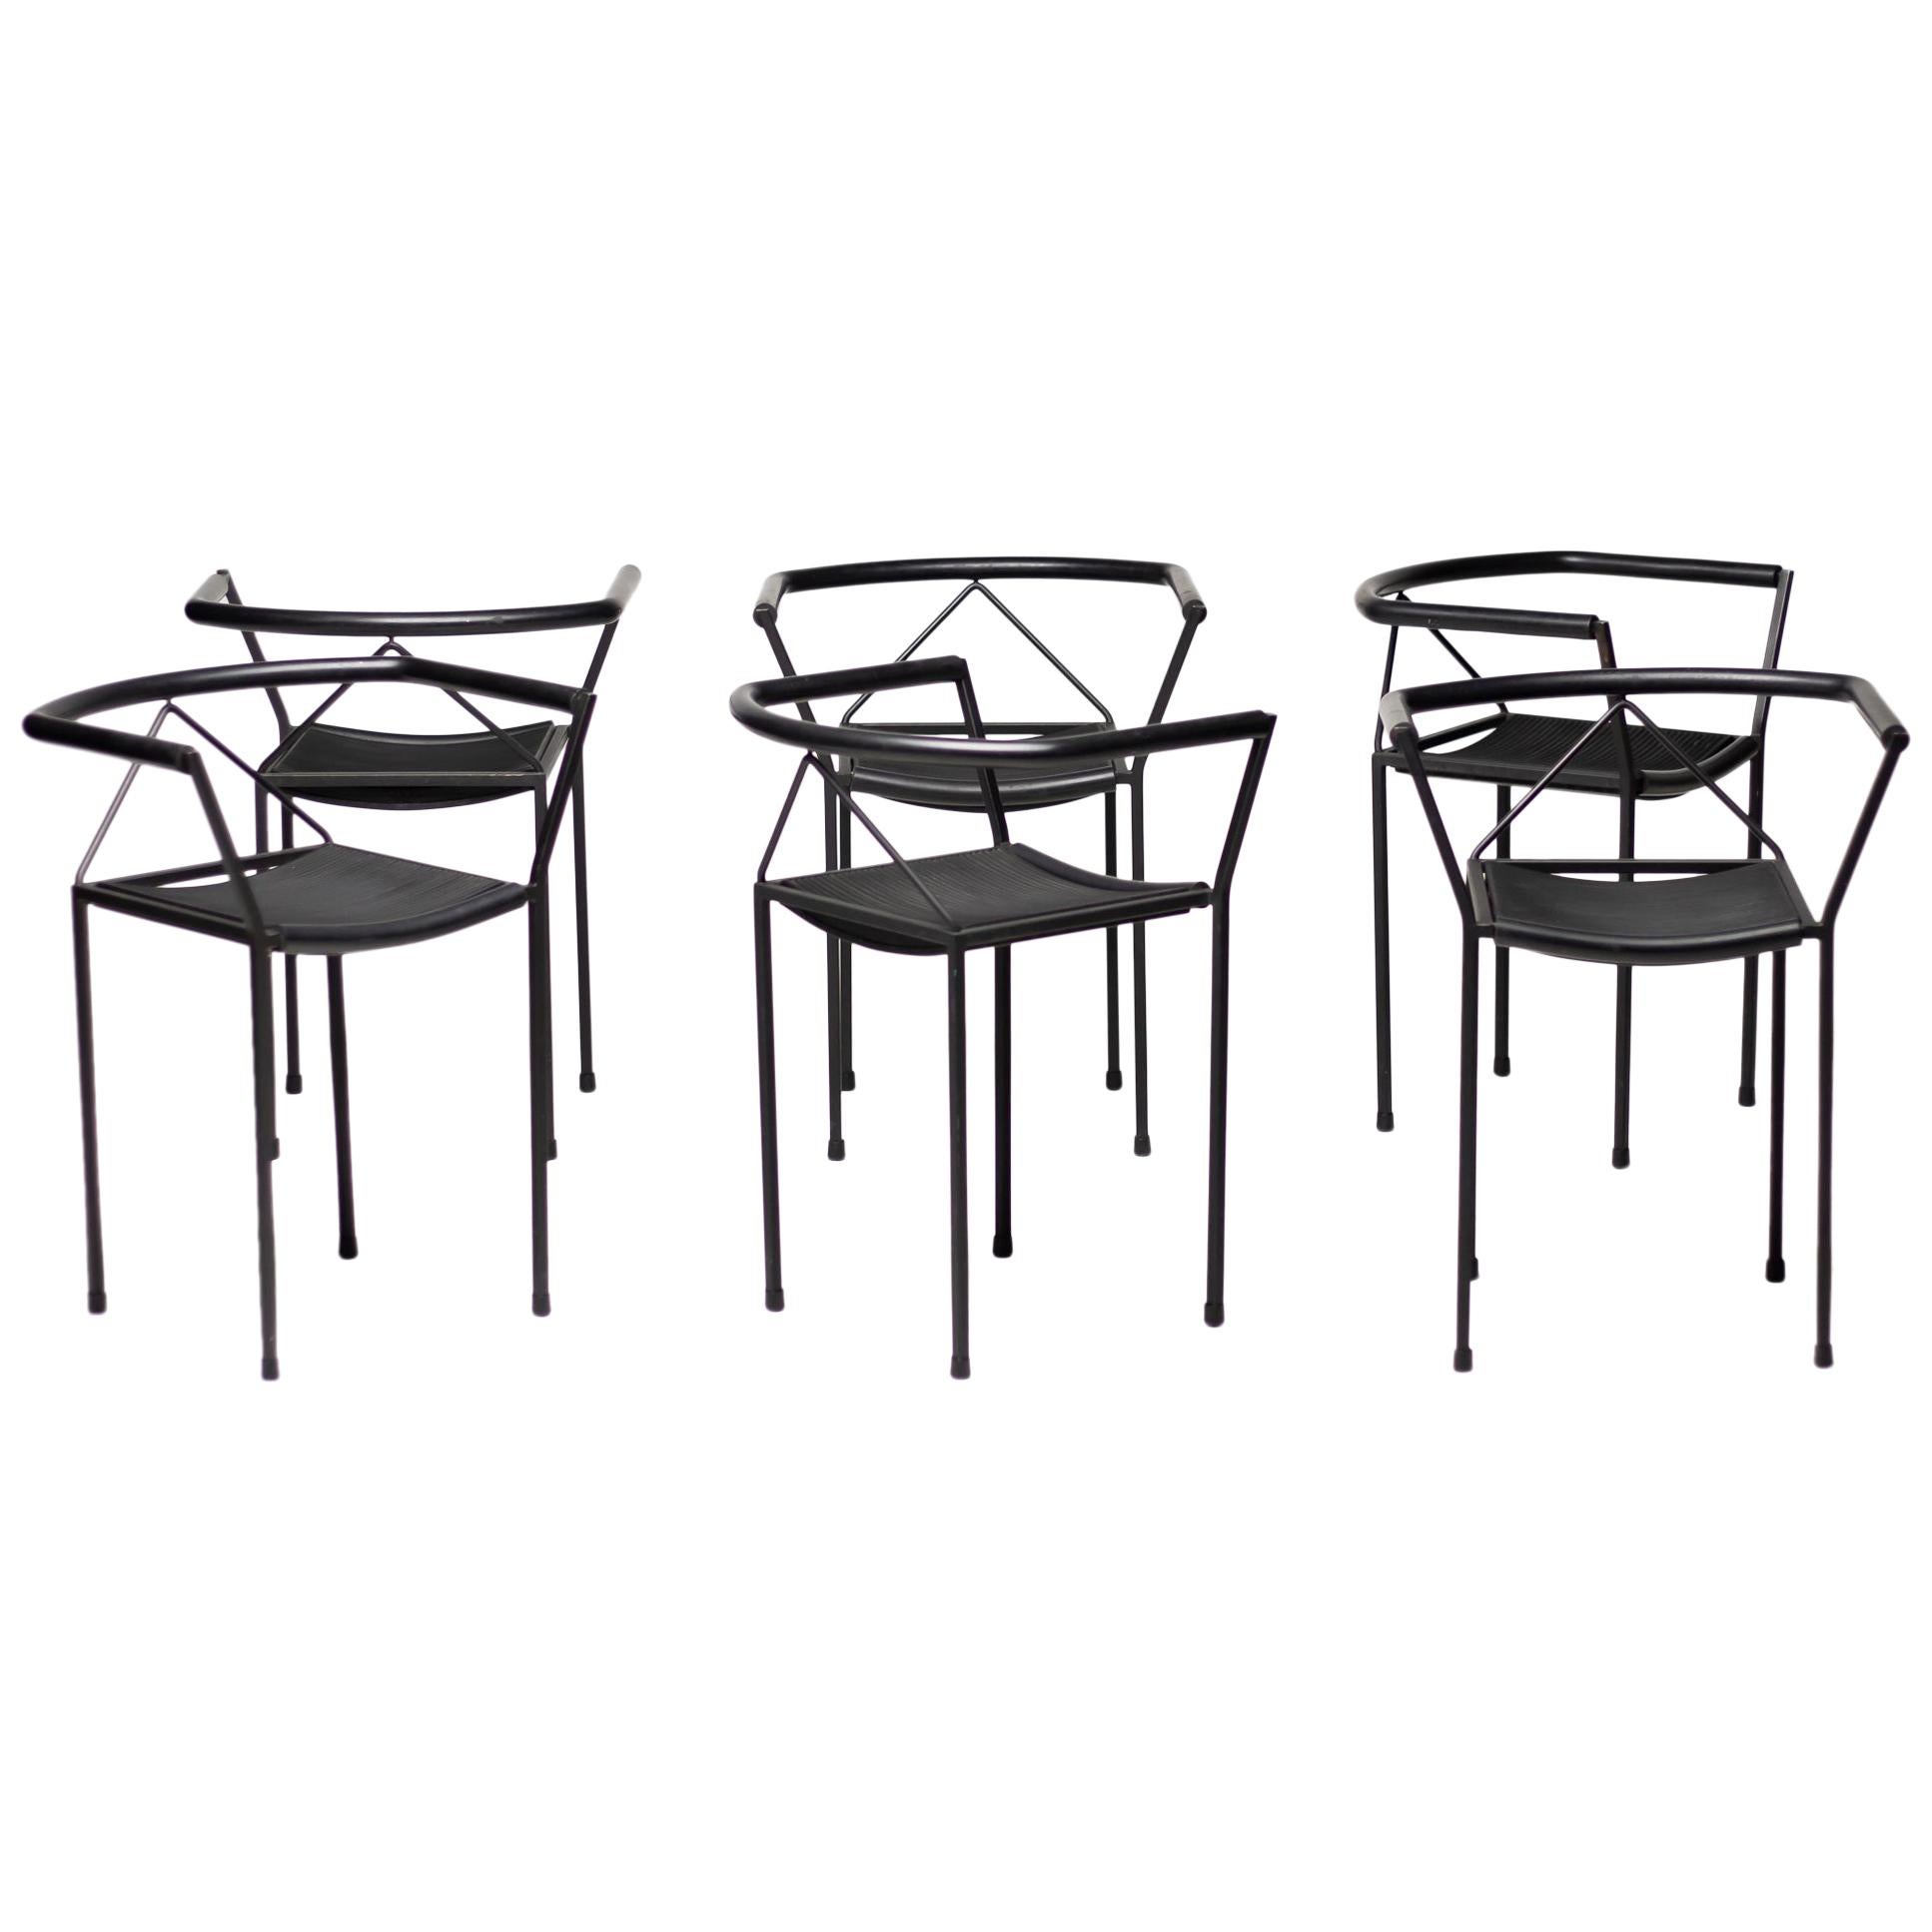 Set of Six Poltroncina Chairs by Maurizio Peregalli